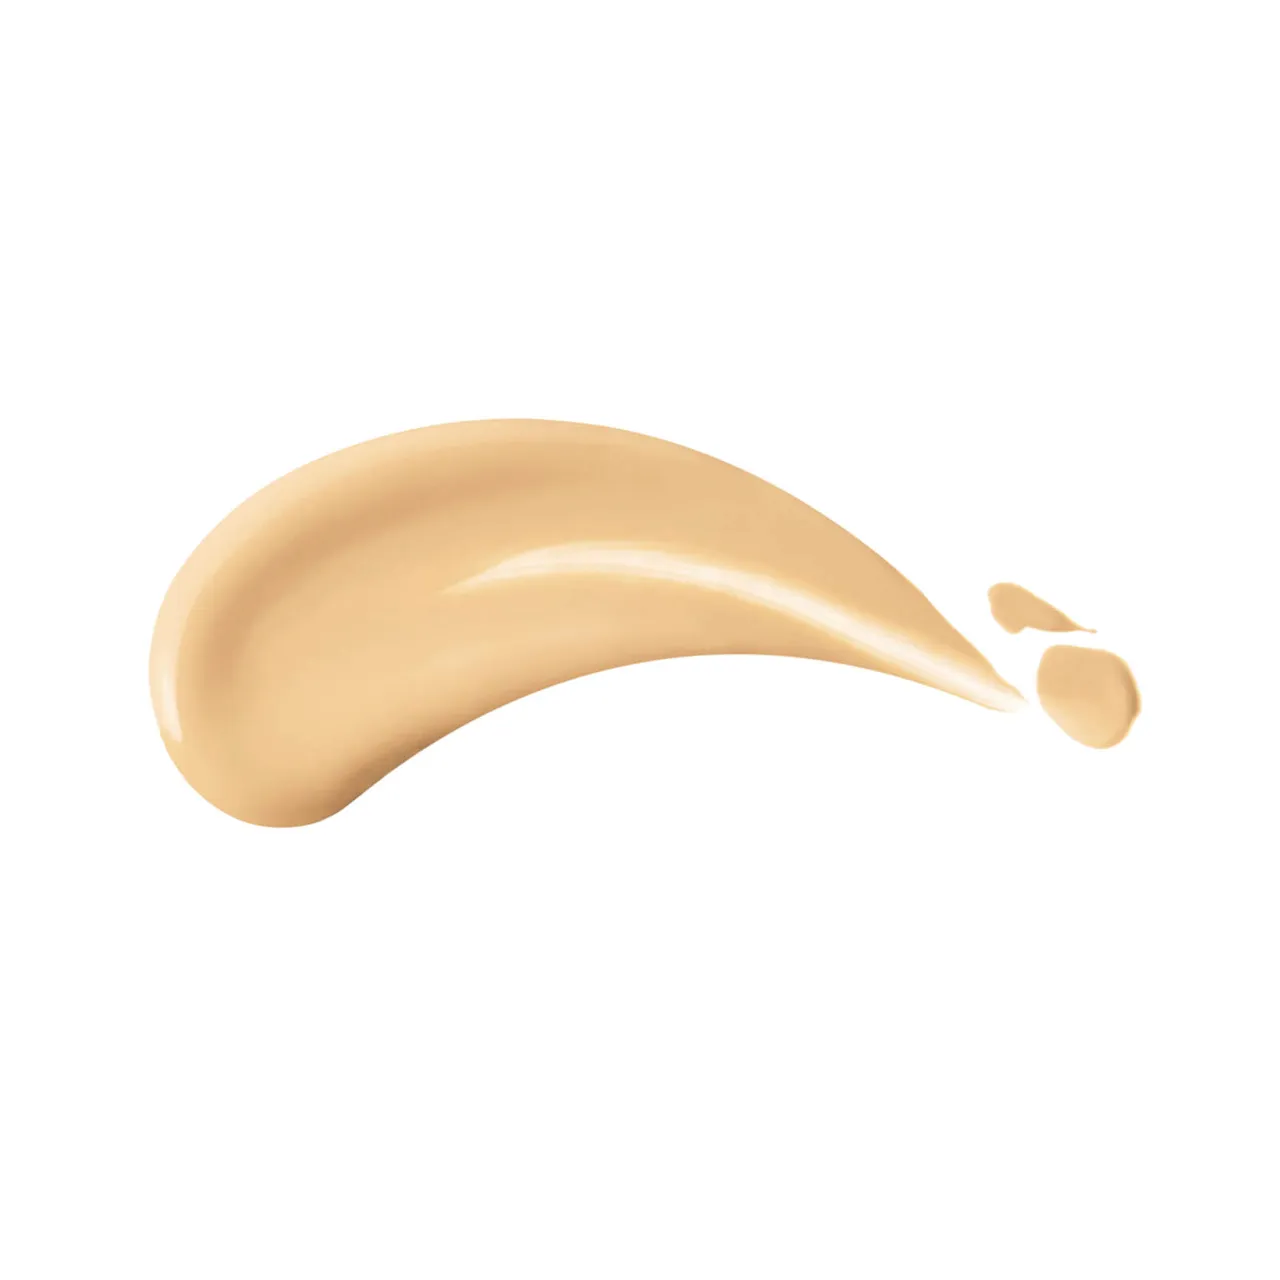 Shiseido Revitalessence Glow Foundation Exclusive 30ml (Various Shades) - 250 Sand